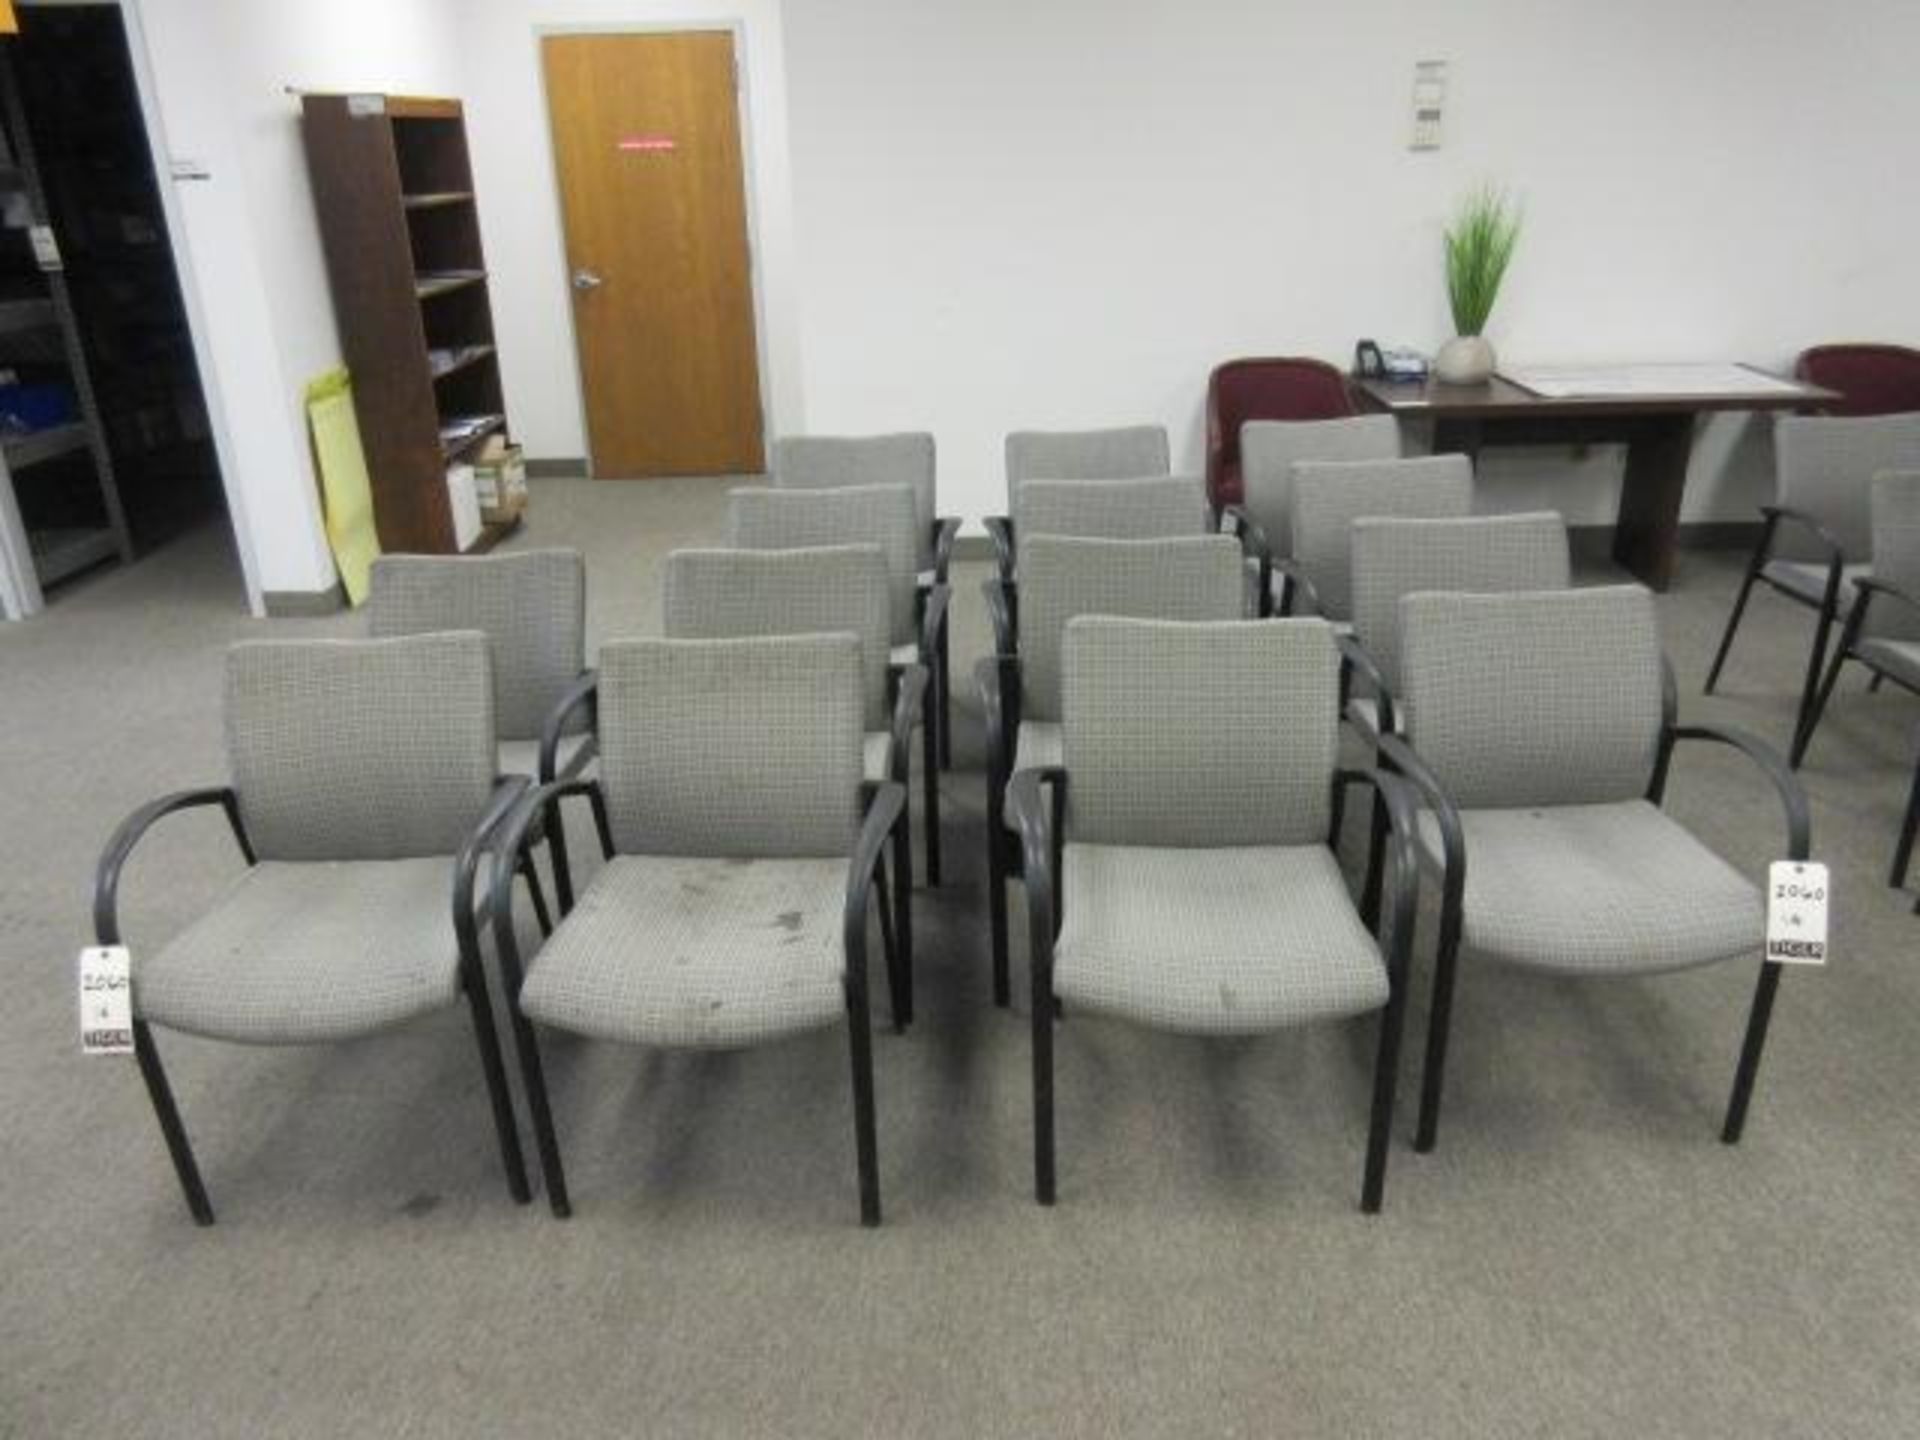 Meeting Room Chairs - Image 2 of 5